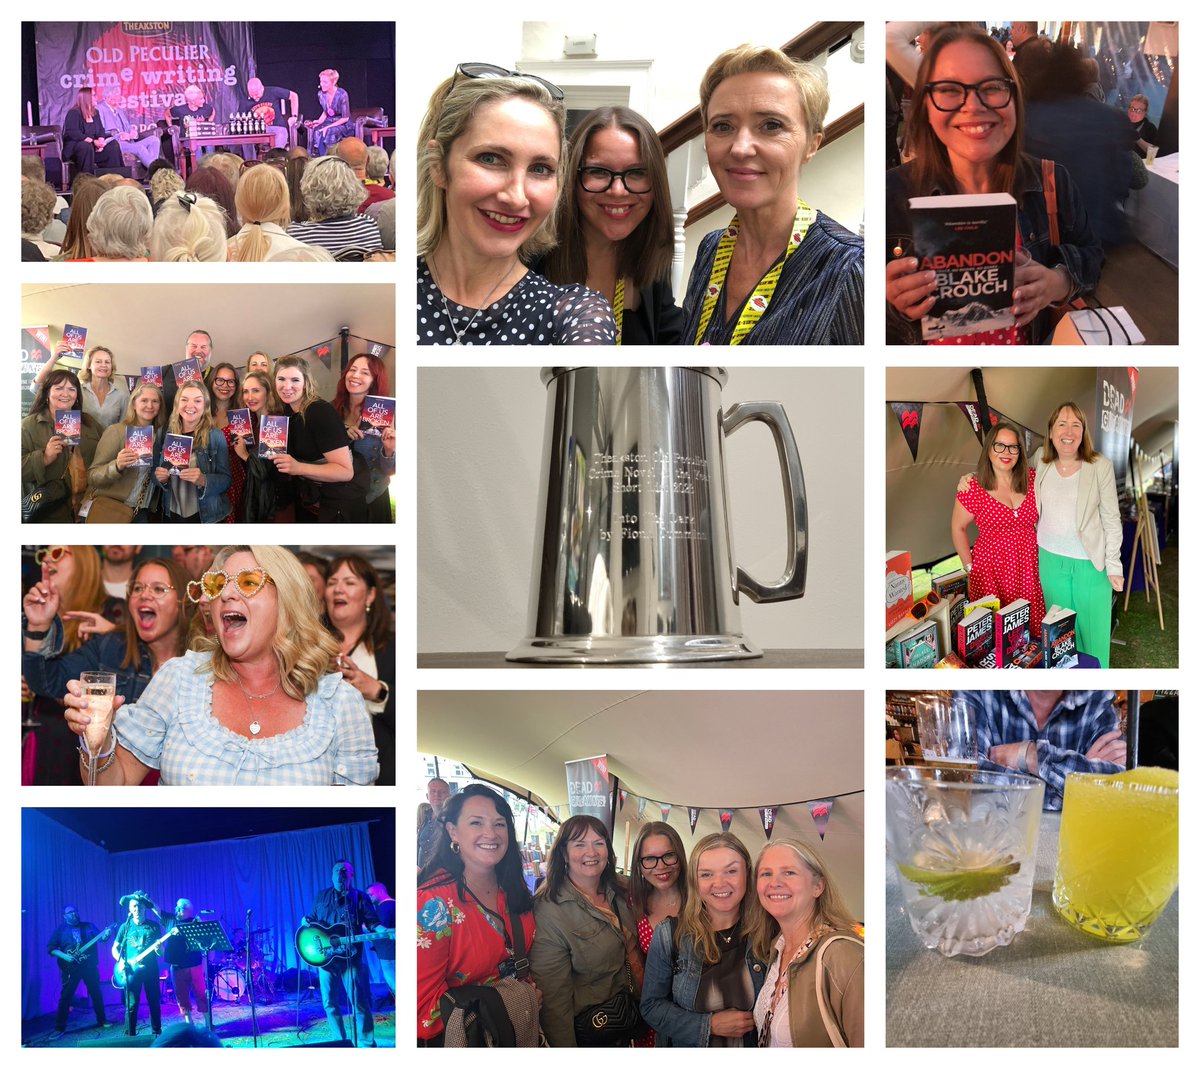 WHAT A WEEKEND. From the #TheakstonsCrime shortlist to moderating brilliant authors to launching #AllOfUsAreBroken, my feet haven't touched the ground! My Harrogate '23 has been full of friends, old and new, books, music, kebabs, sambuca and so much laughter. Roll on, 2024.